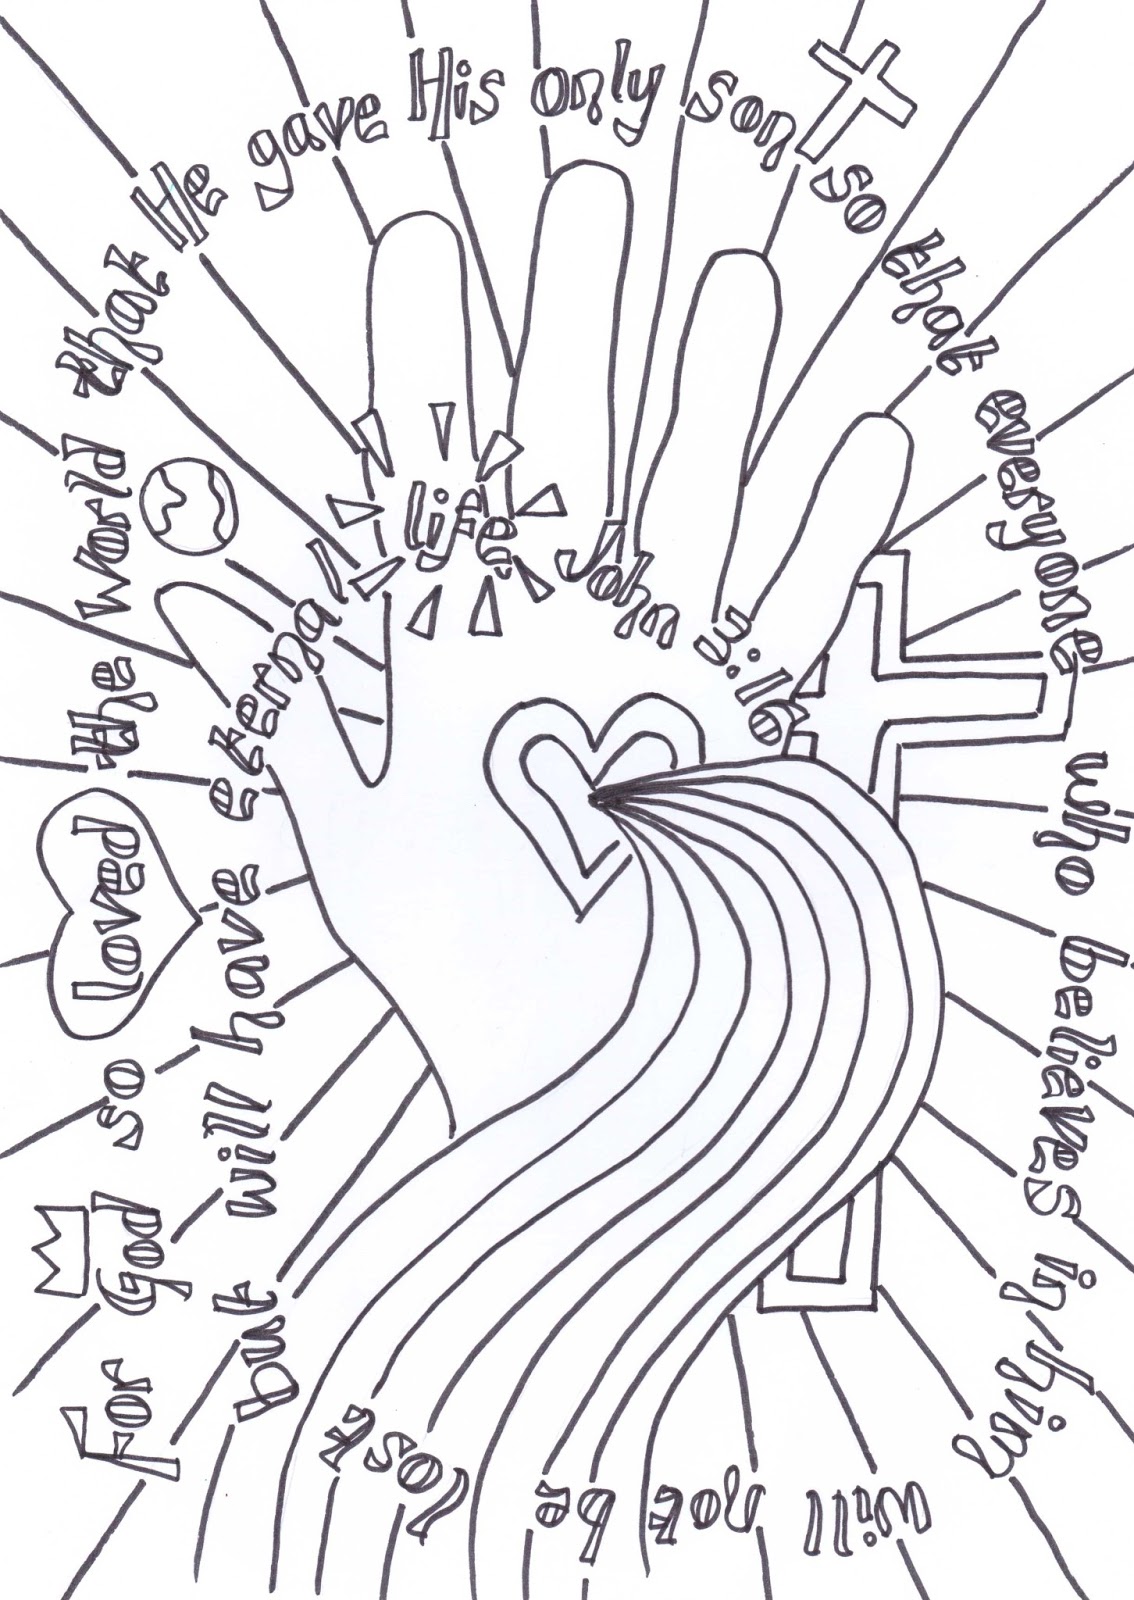 Flame: Creative Children's Ministry: John 3:16 verse to colour